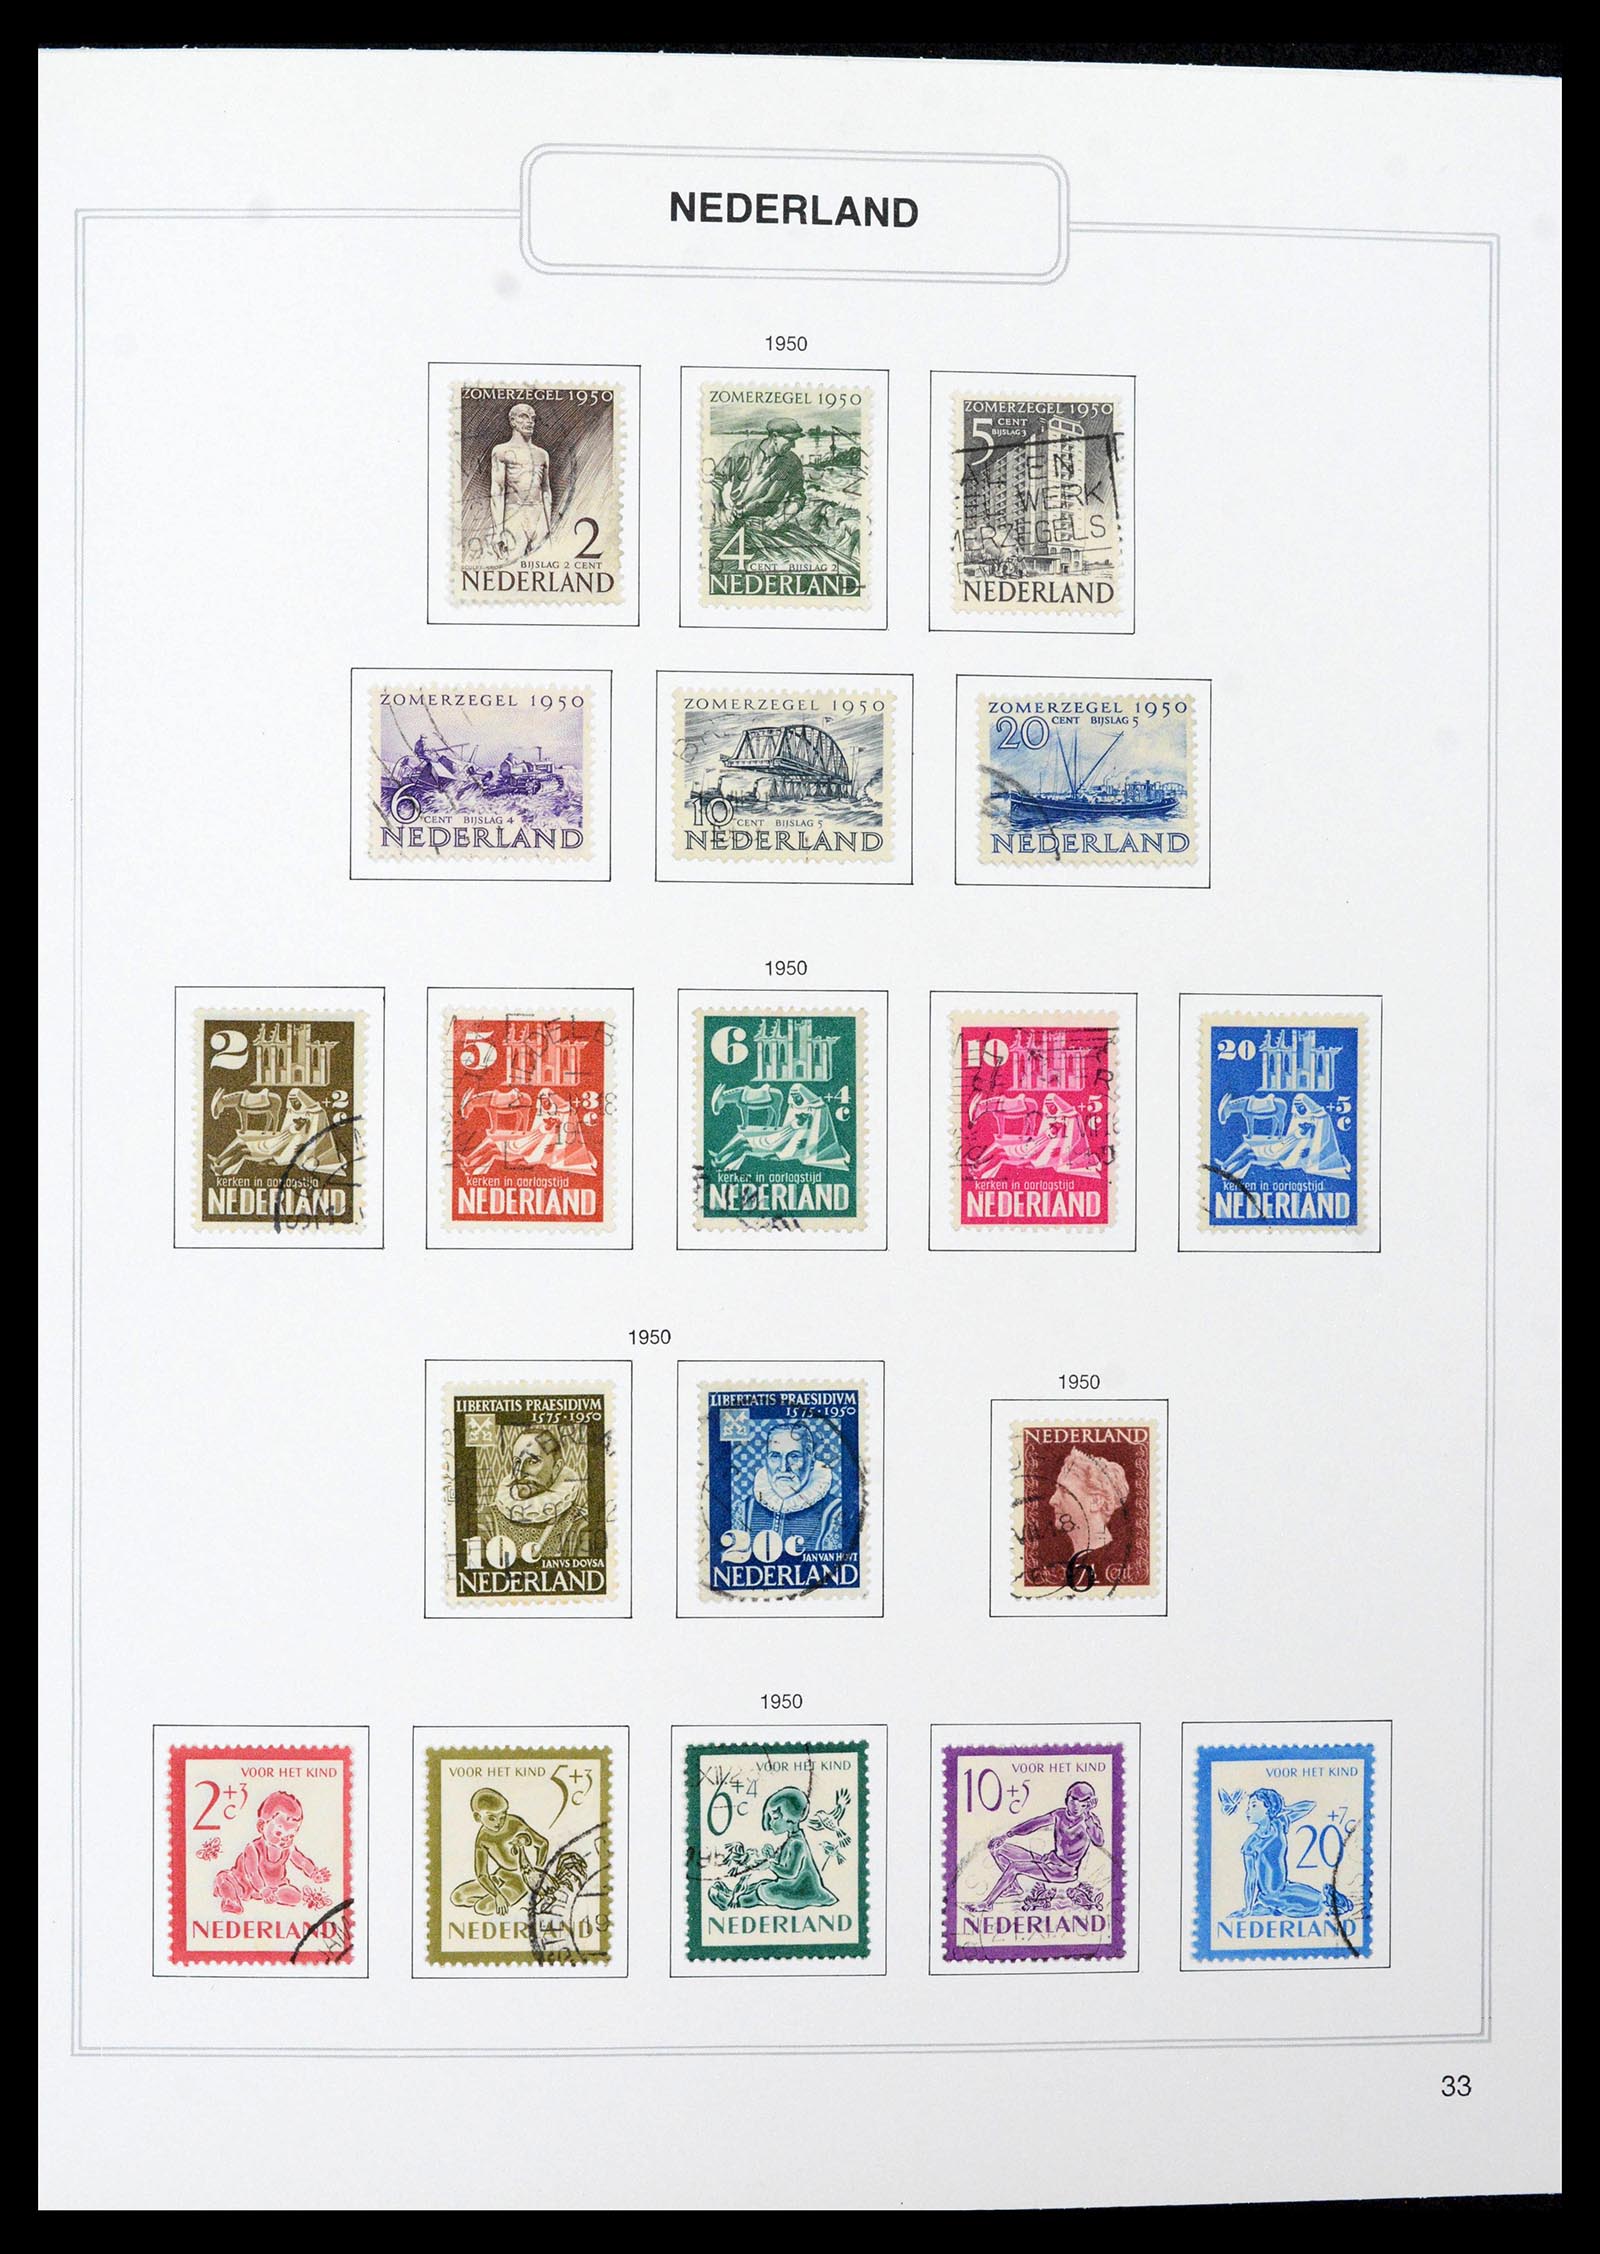 39261 0033 - Stamp collection 39261 Netherlands 1852-2015.